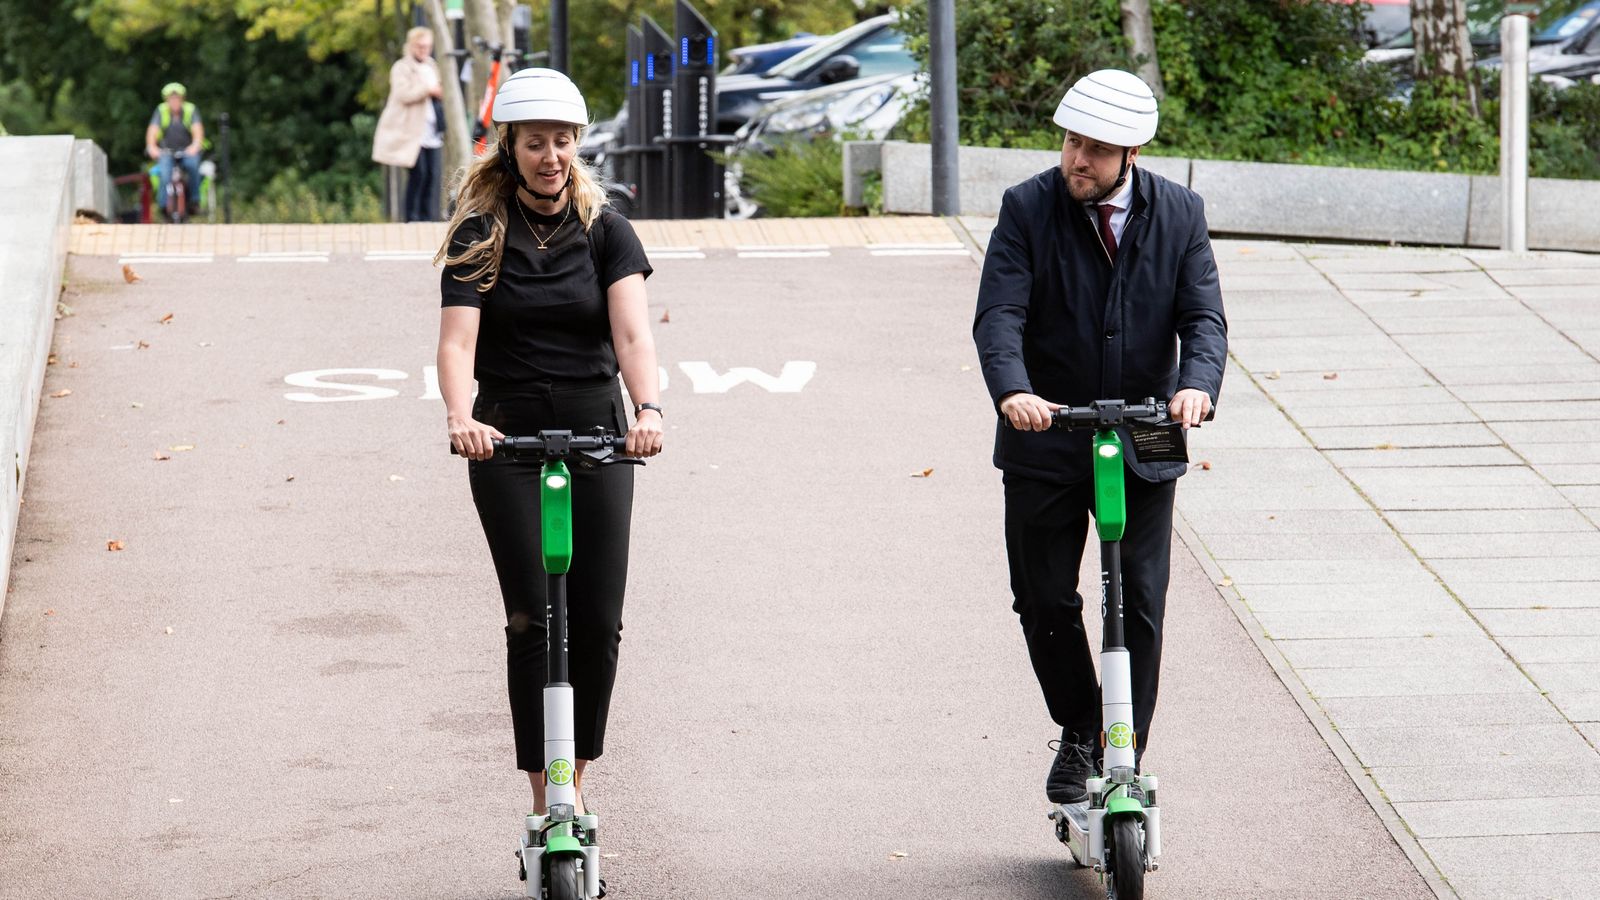 E-scooters to be allowed on London’s roads as trial set to launch